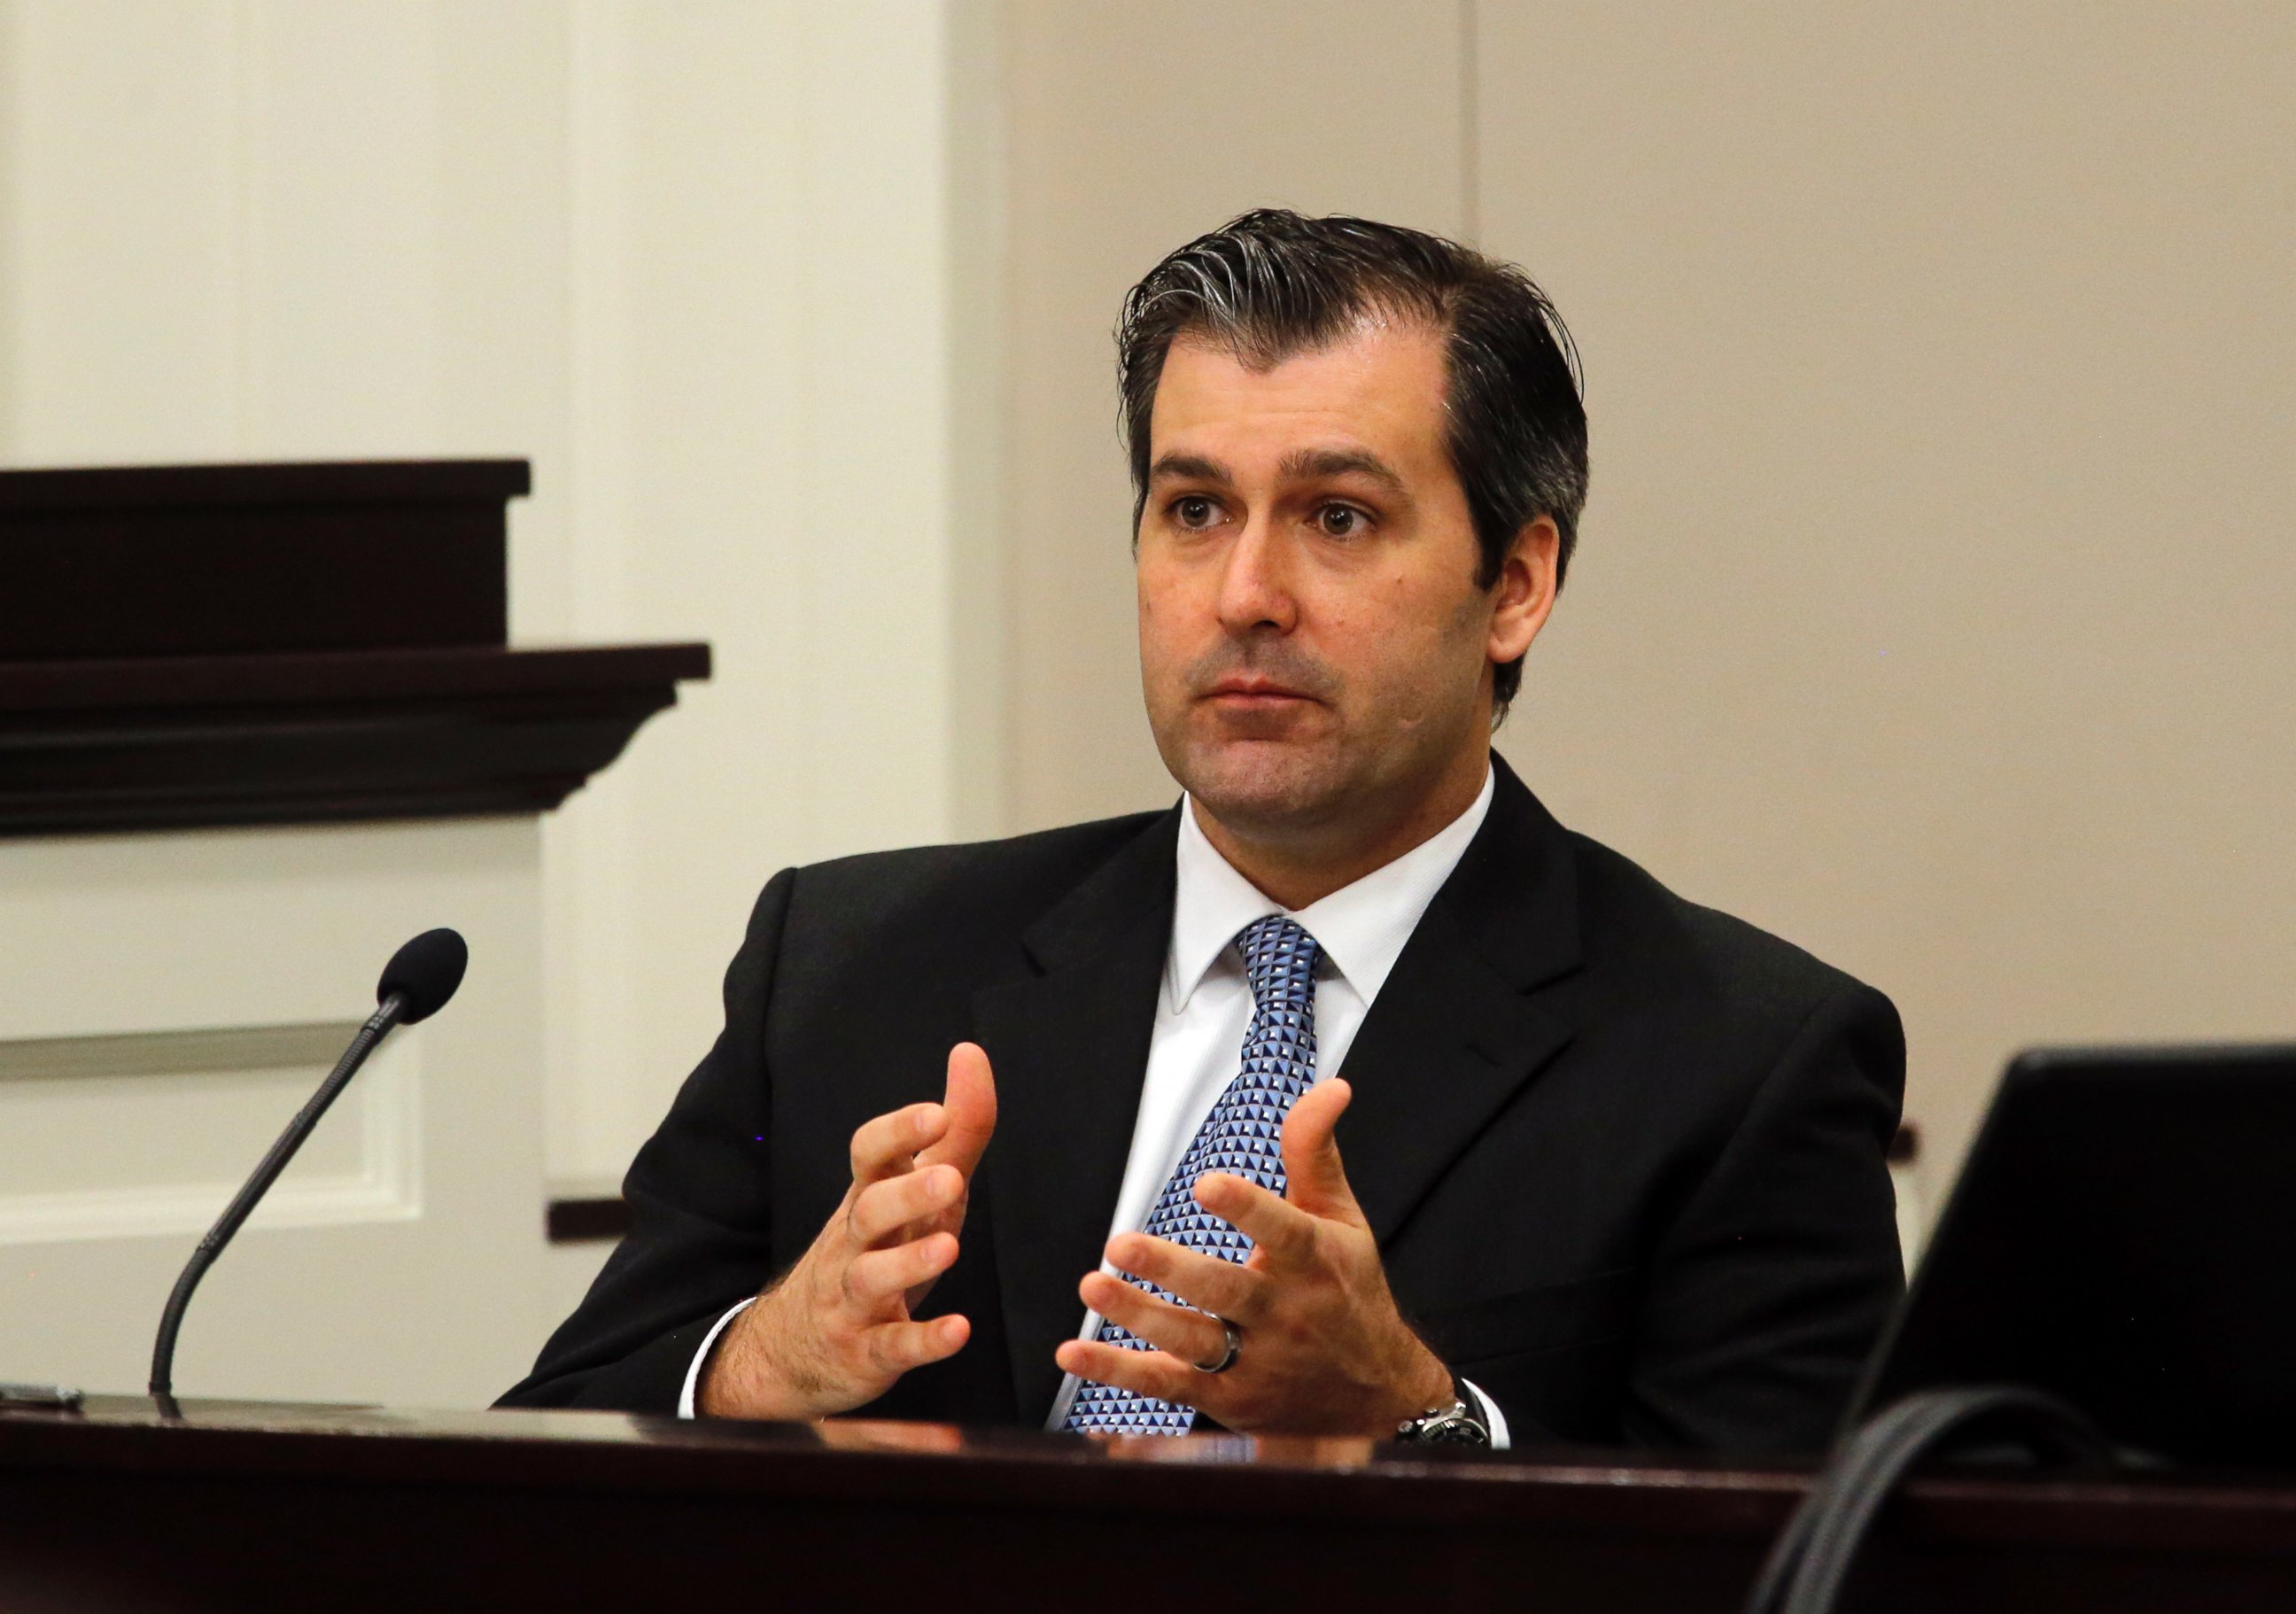 PHOTO: Former North Charleston police officer Michael Slager testifies during his murder trial at the Charleston County court in Charleston, South Carolina, Nov. 29, 2016.